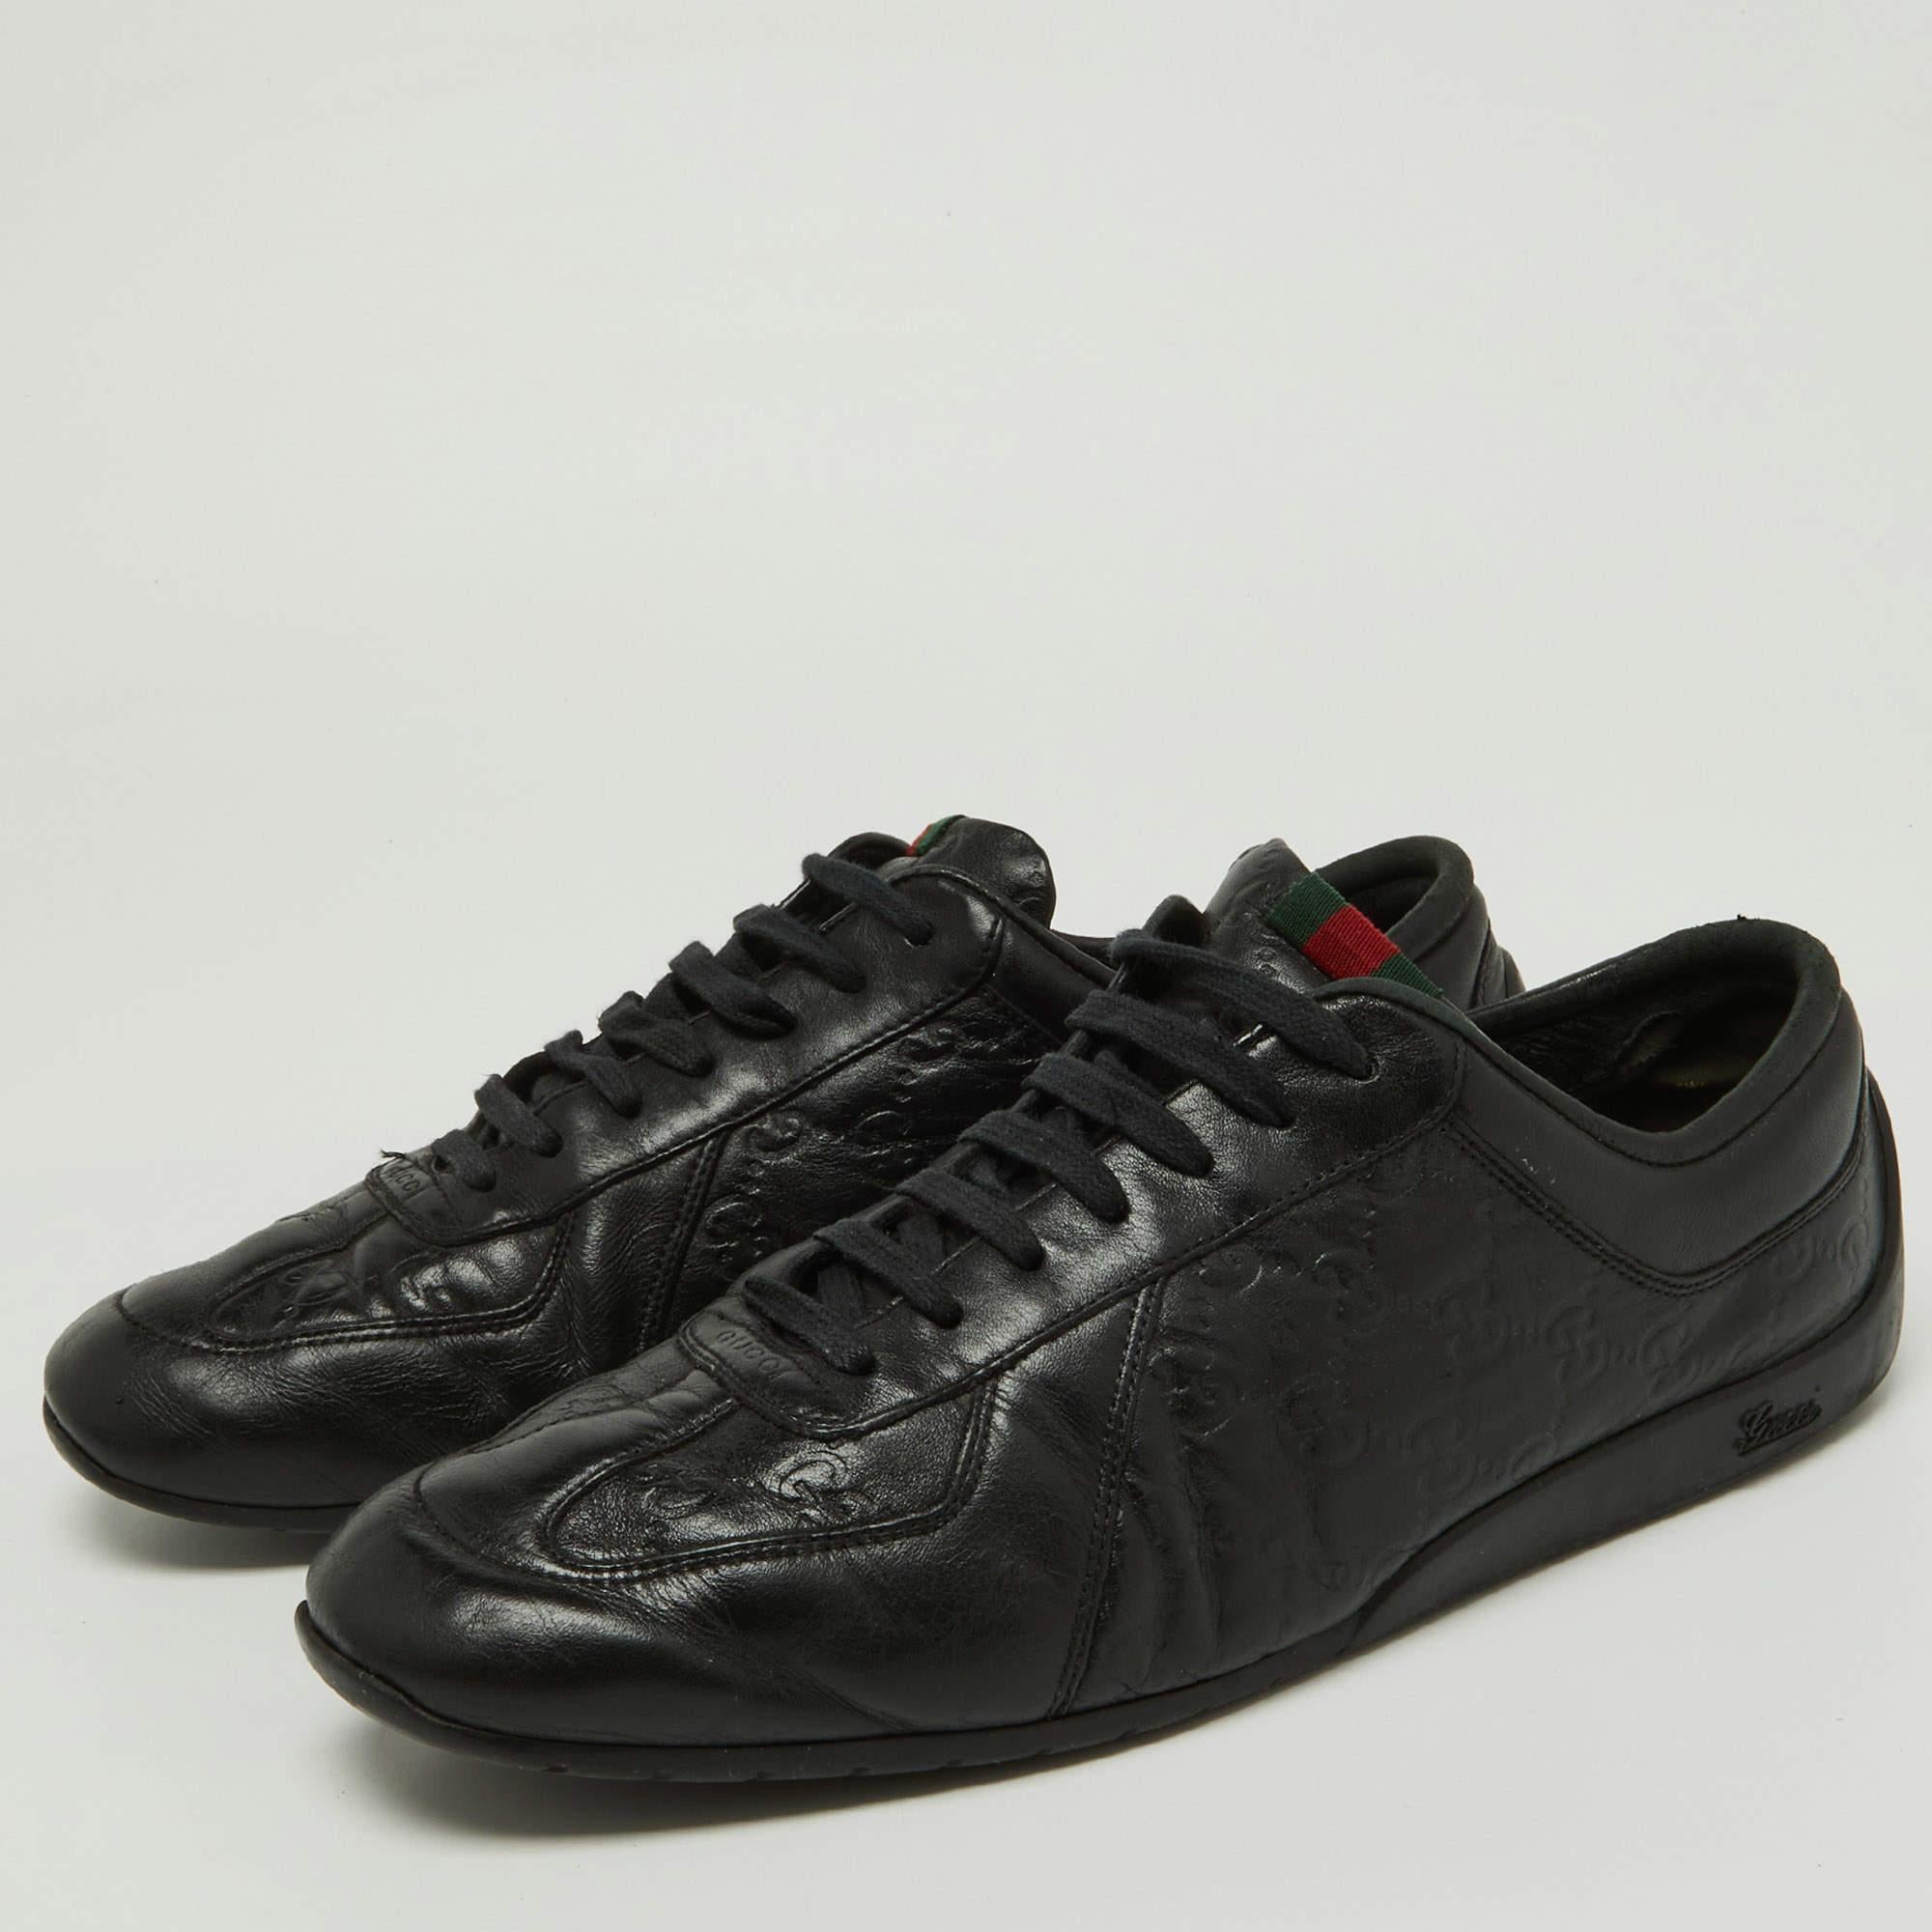 Gucci Black Guccissima Leather Low Top Sneakers Size 44.5 For Sale 7